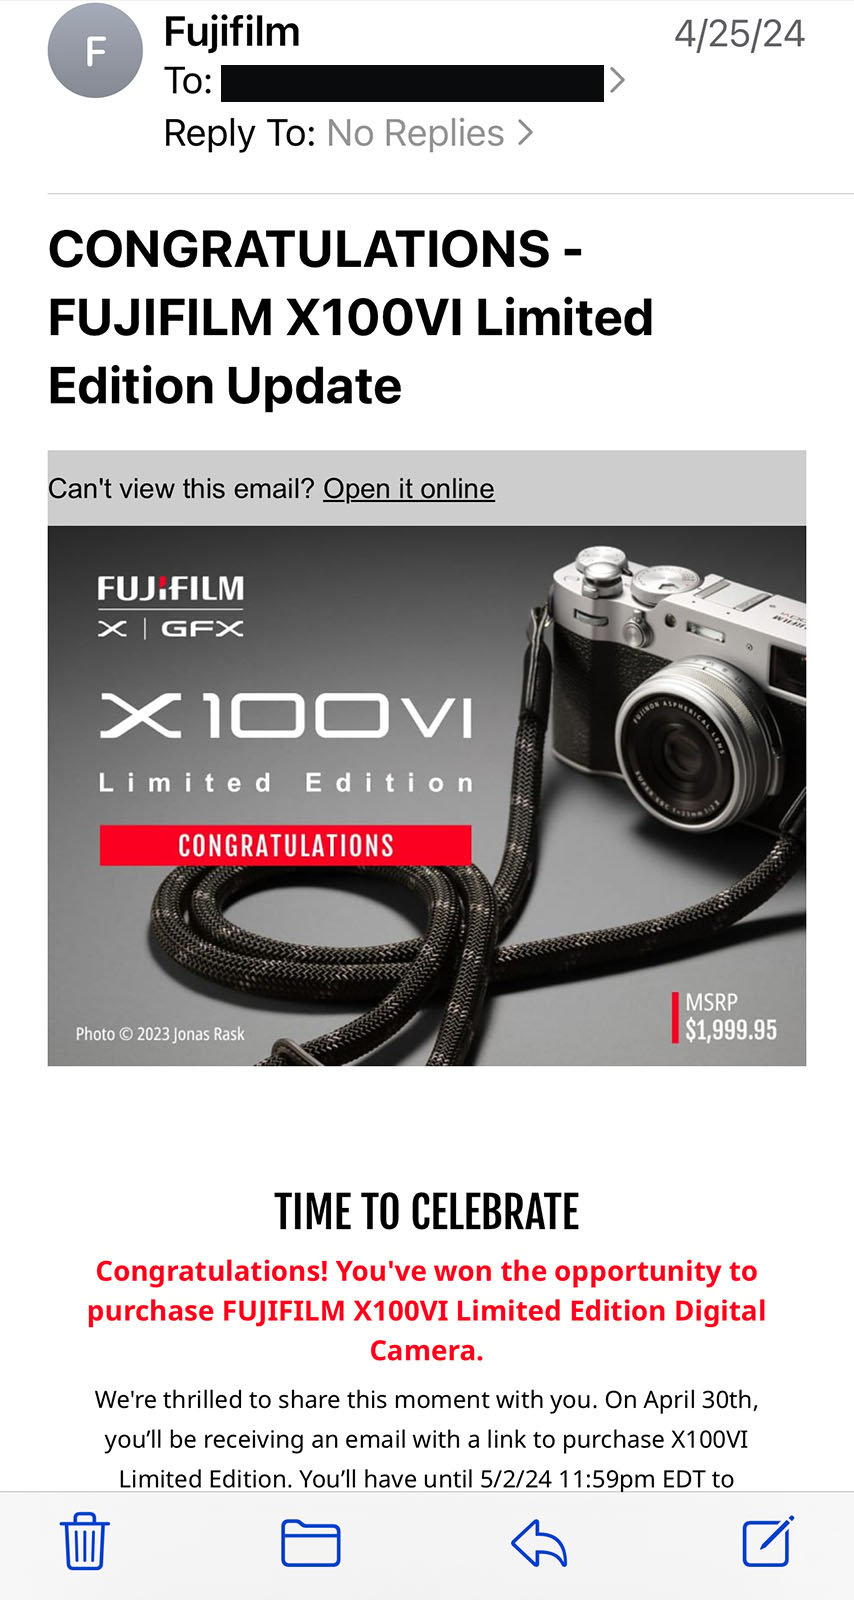 An email screenshot from Fujifilm announces a "FUJIFILM X100VI Limited Edition Update." It features a black and silver Fujifilm camera beside congratulatory text stating the recipient has the opportunity to purchase it. MSRP price is listed as $1,899.95.